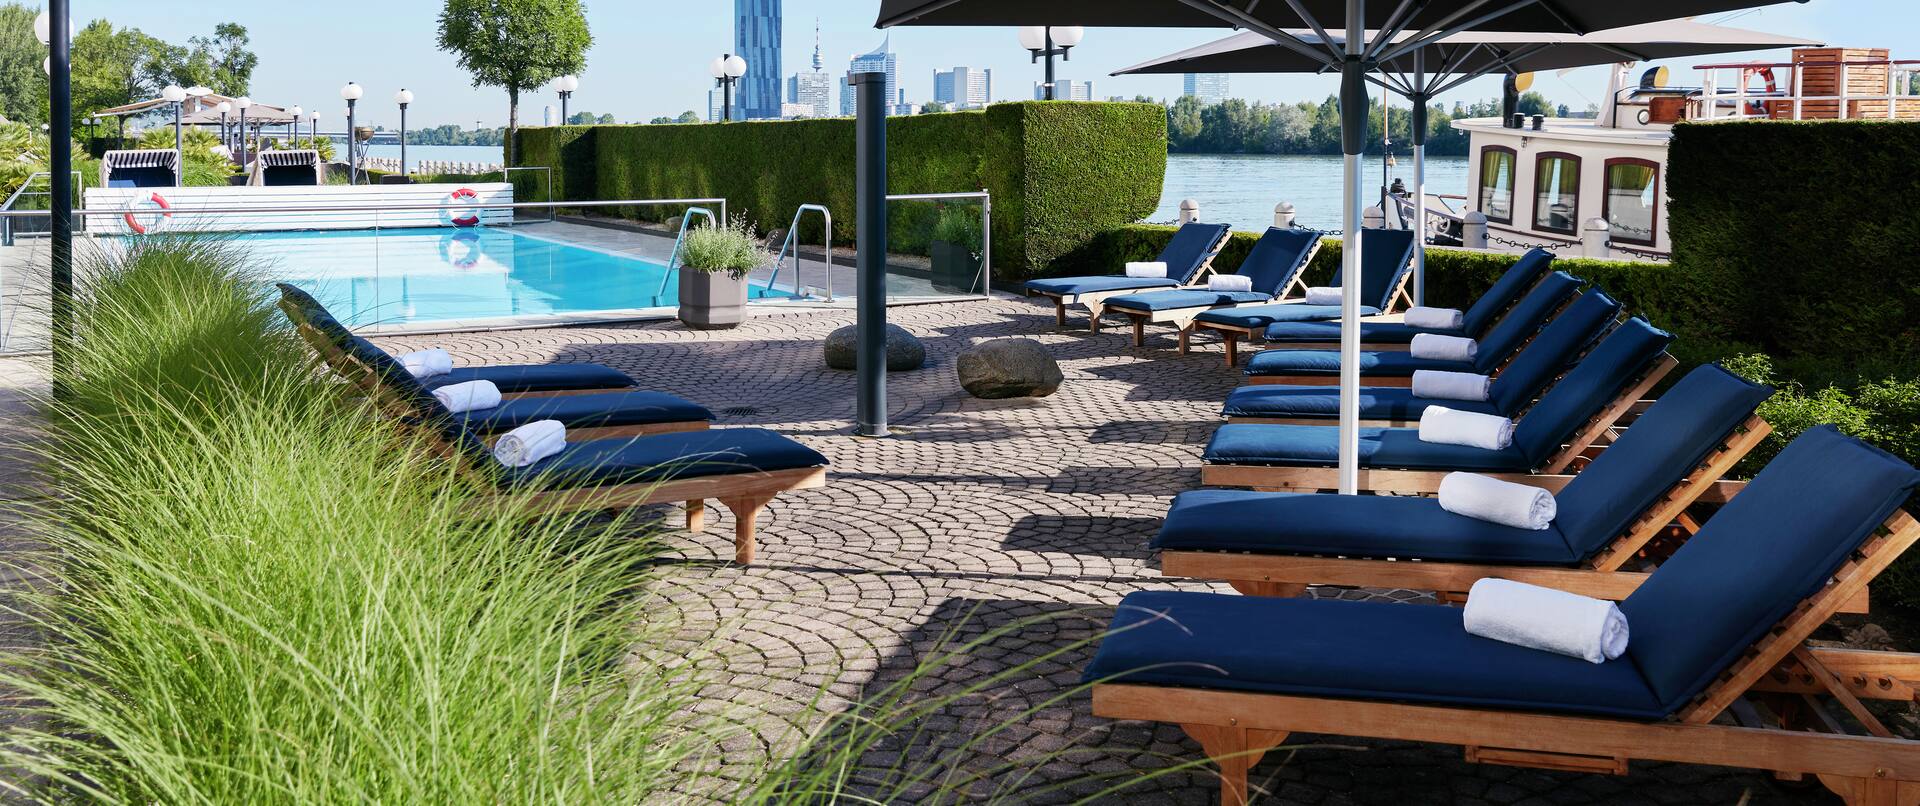 Outdoor Pool with Lounging Chairs and Large Sun Umbrellas